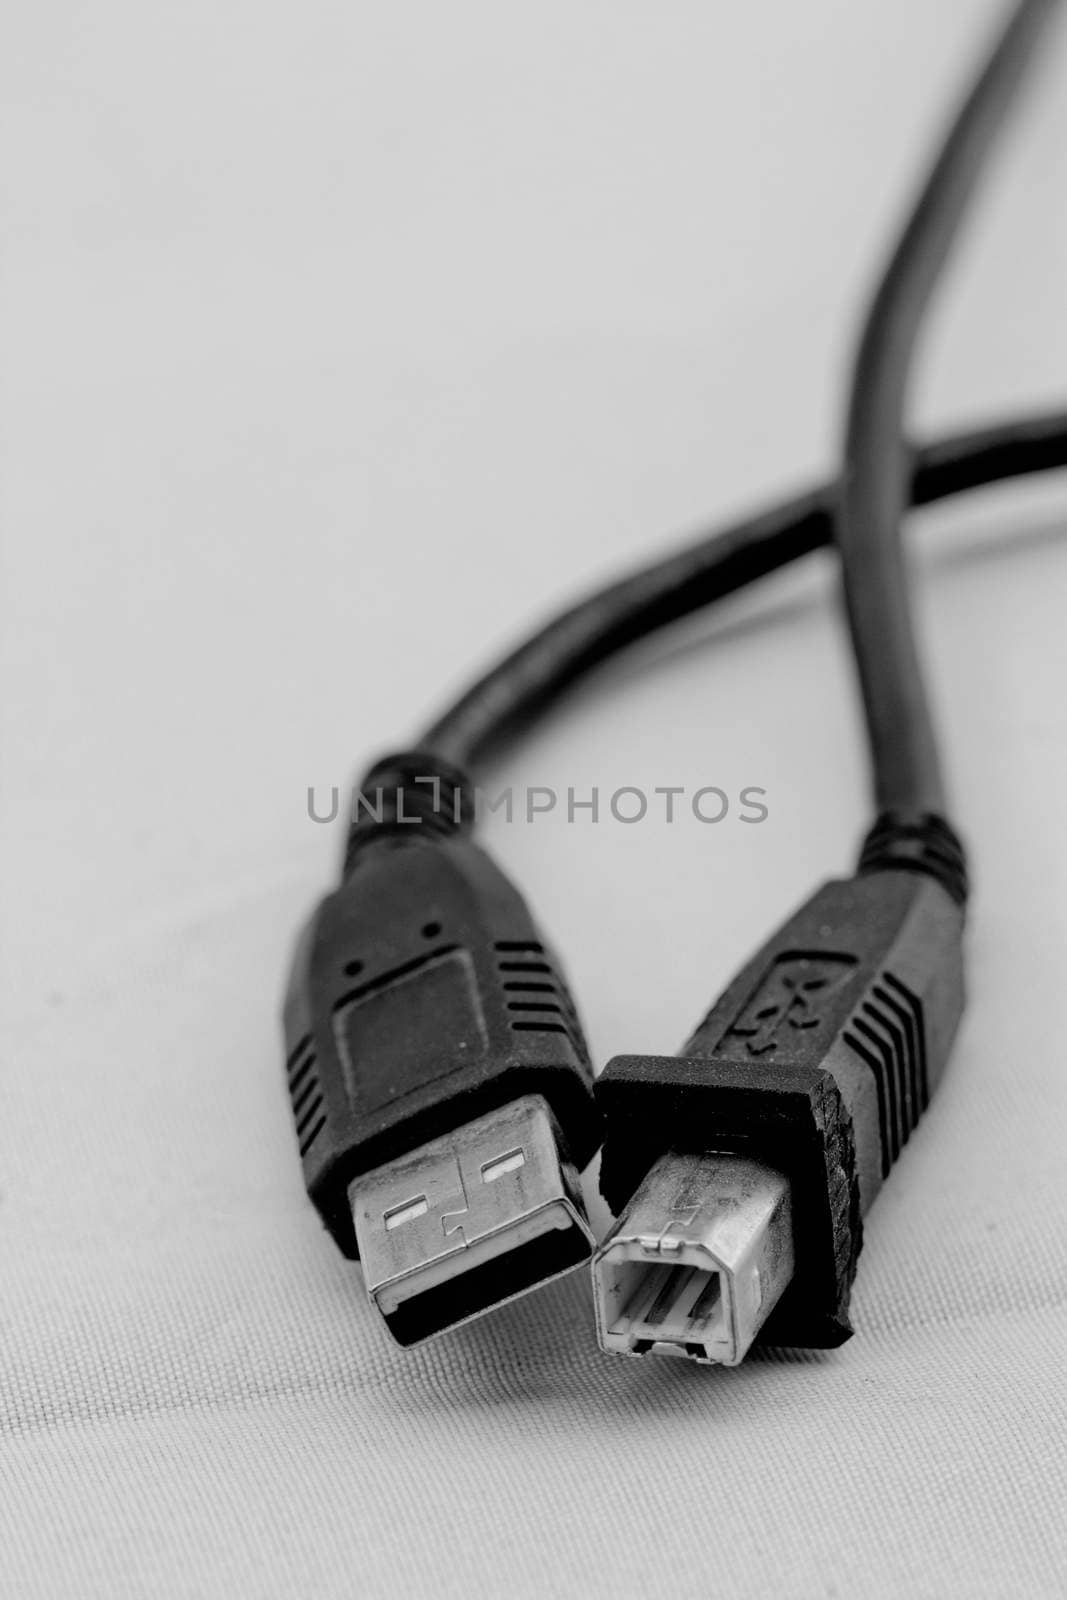 usb cable panel on white background (a, b)